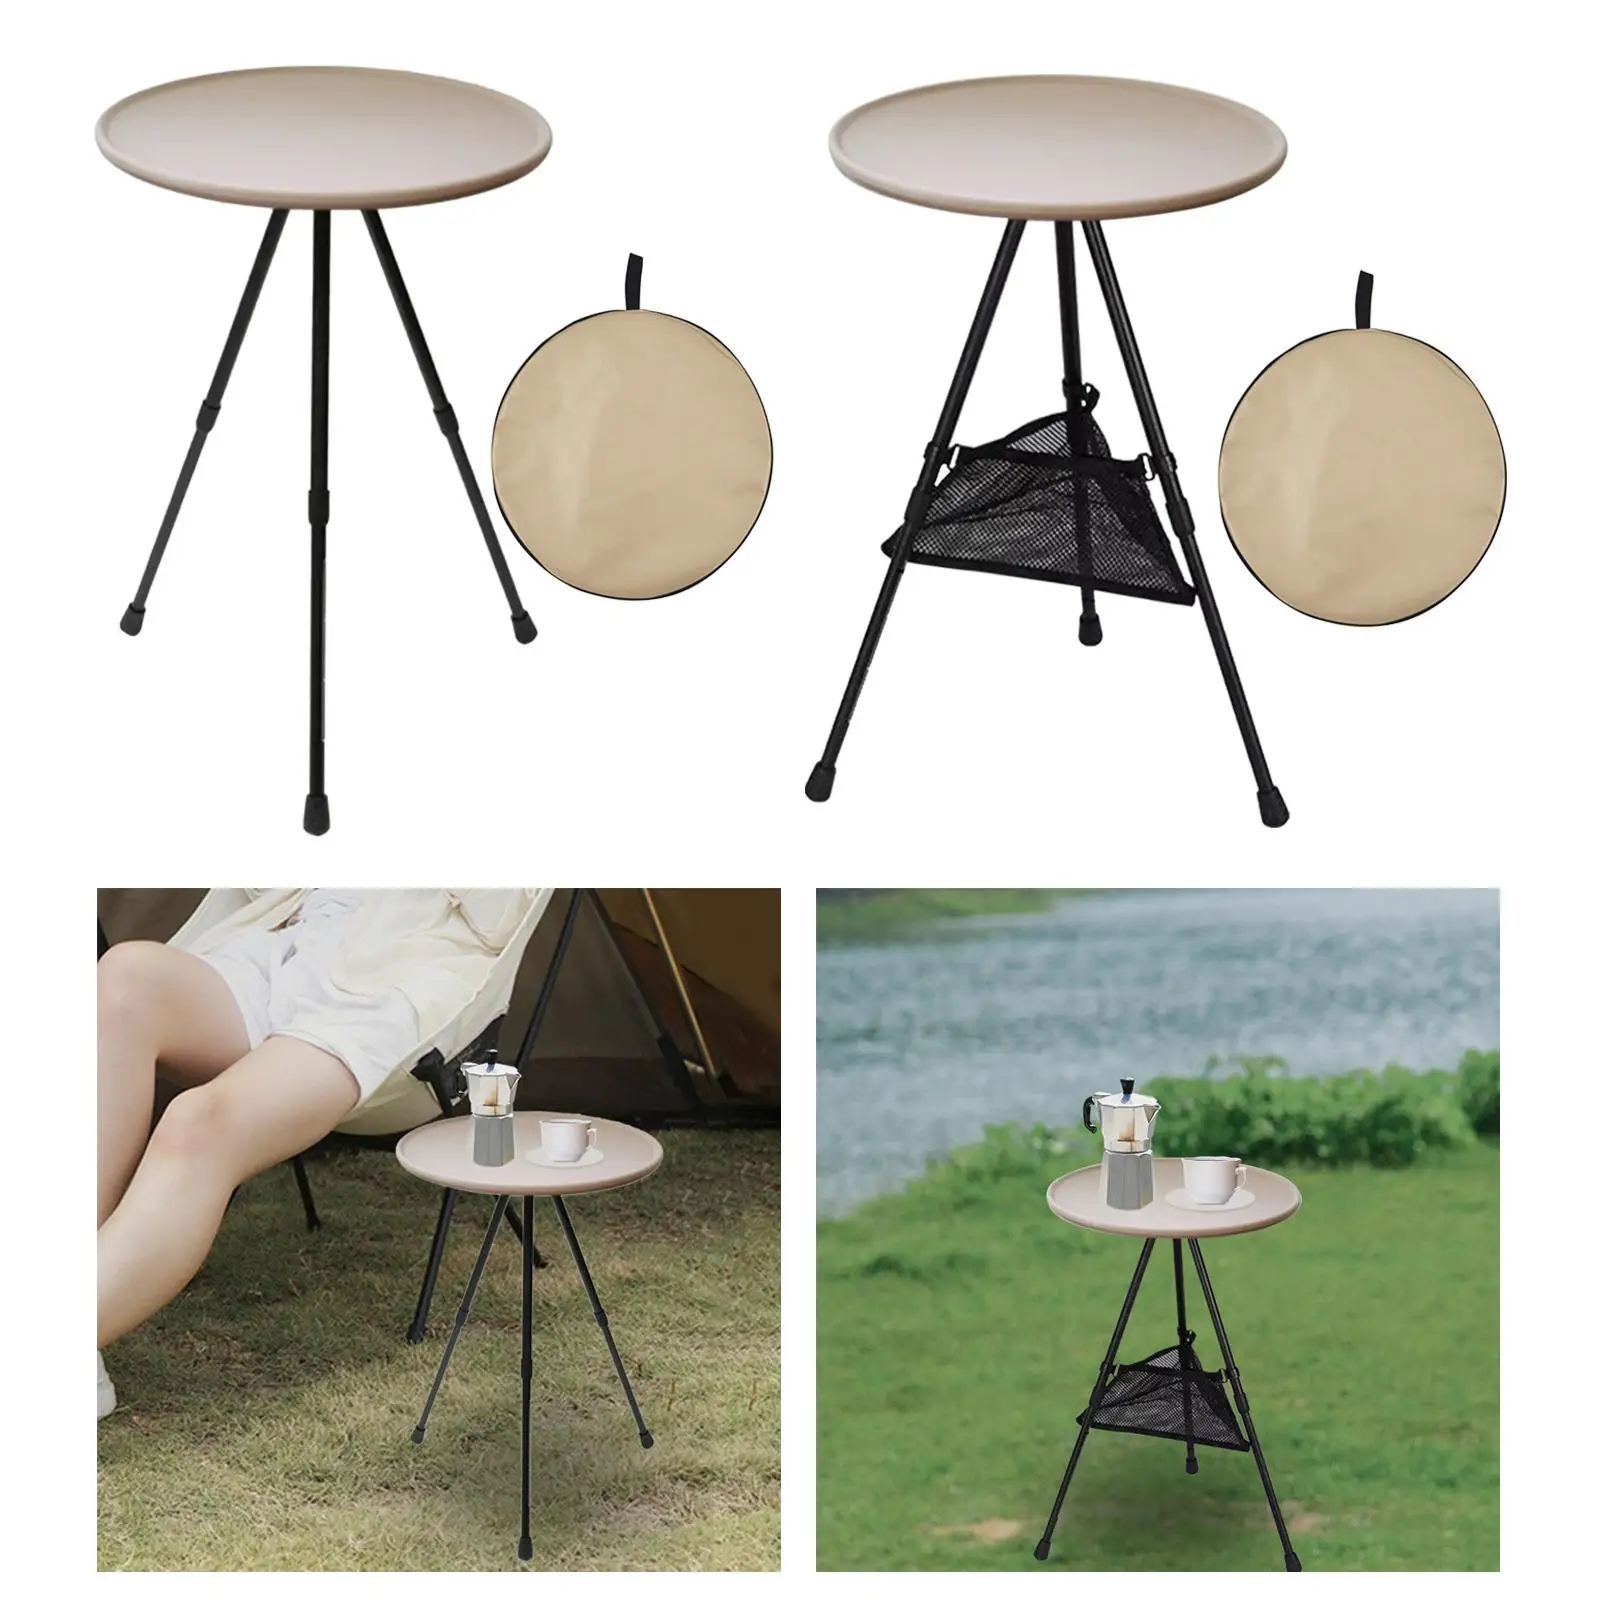 Outdoor Folding Round Table Portable Tea Coffee Table Camping Table Dining Table Foldable Picnic Table for Fishing Backyard